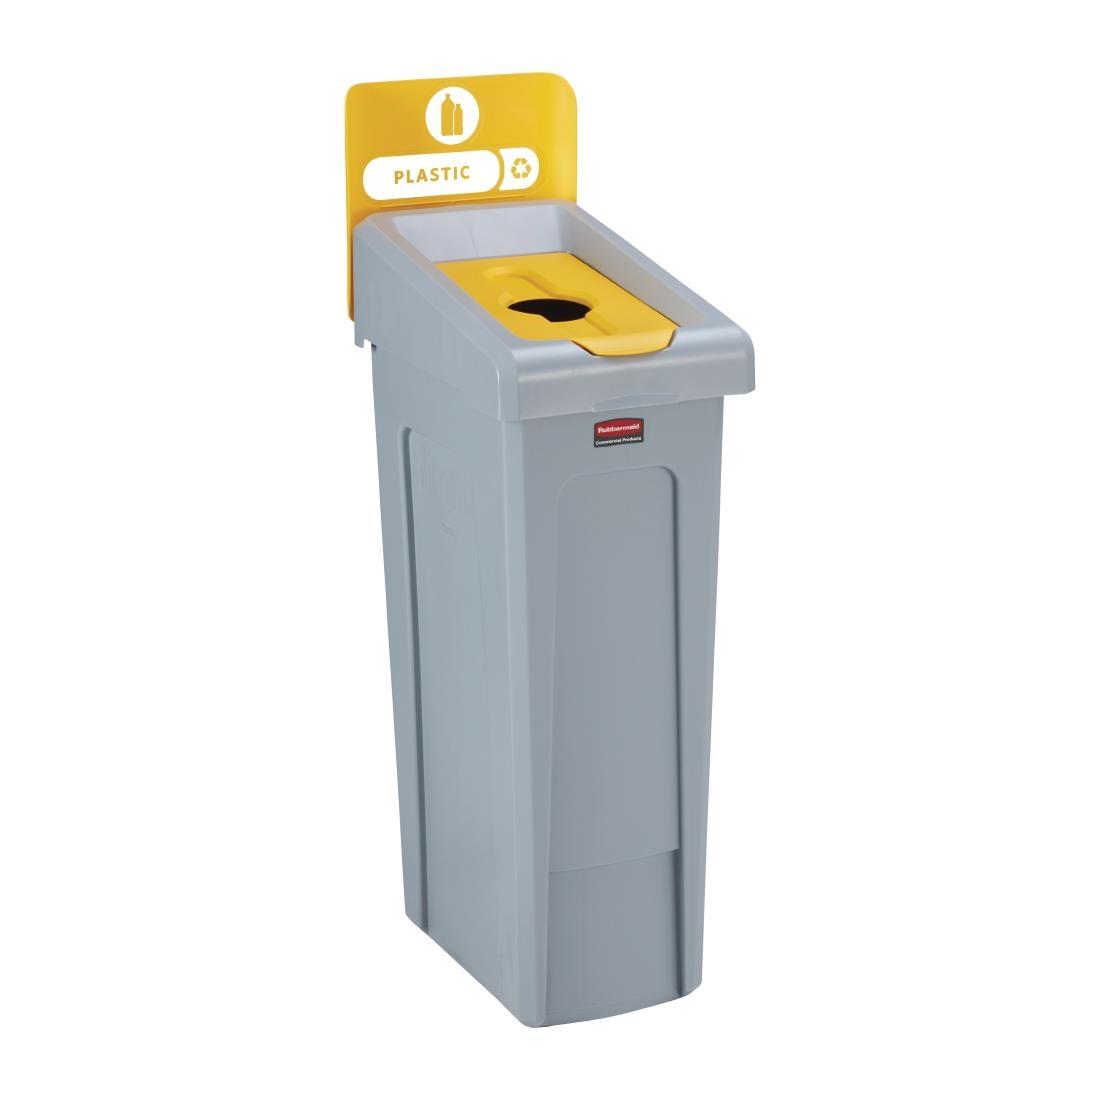 Rubbermaid Slim Jim Plastic Recycling Station Yellow 87Ltr - DY085  - 1